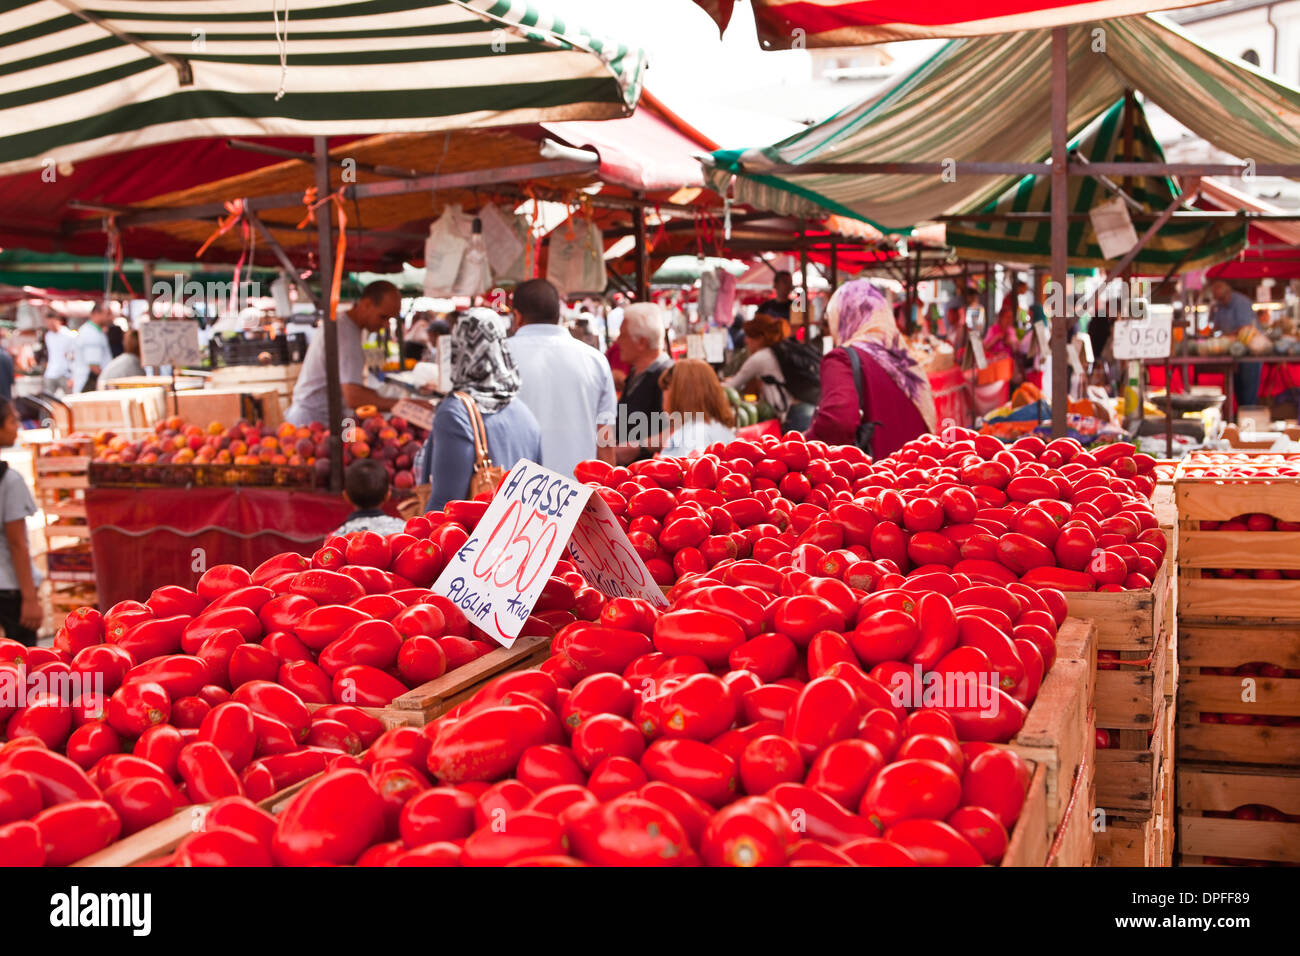 Tomatoes on sale at the open air market of Piazza della Repubblica, Turin, Piedmont, Italy, Europe Stock Photo